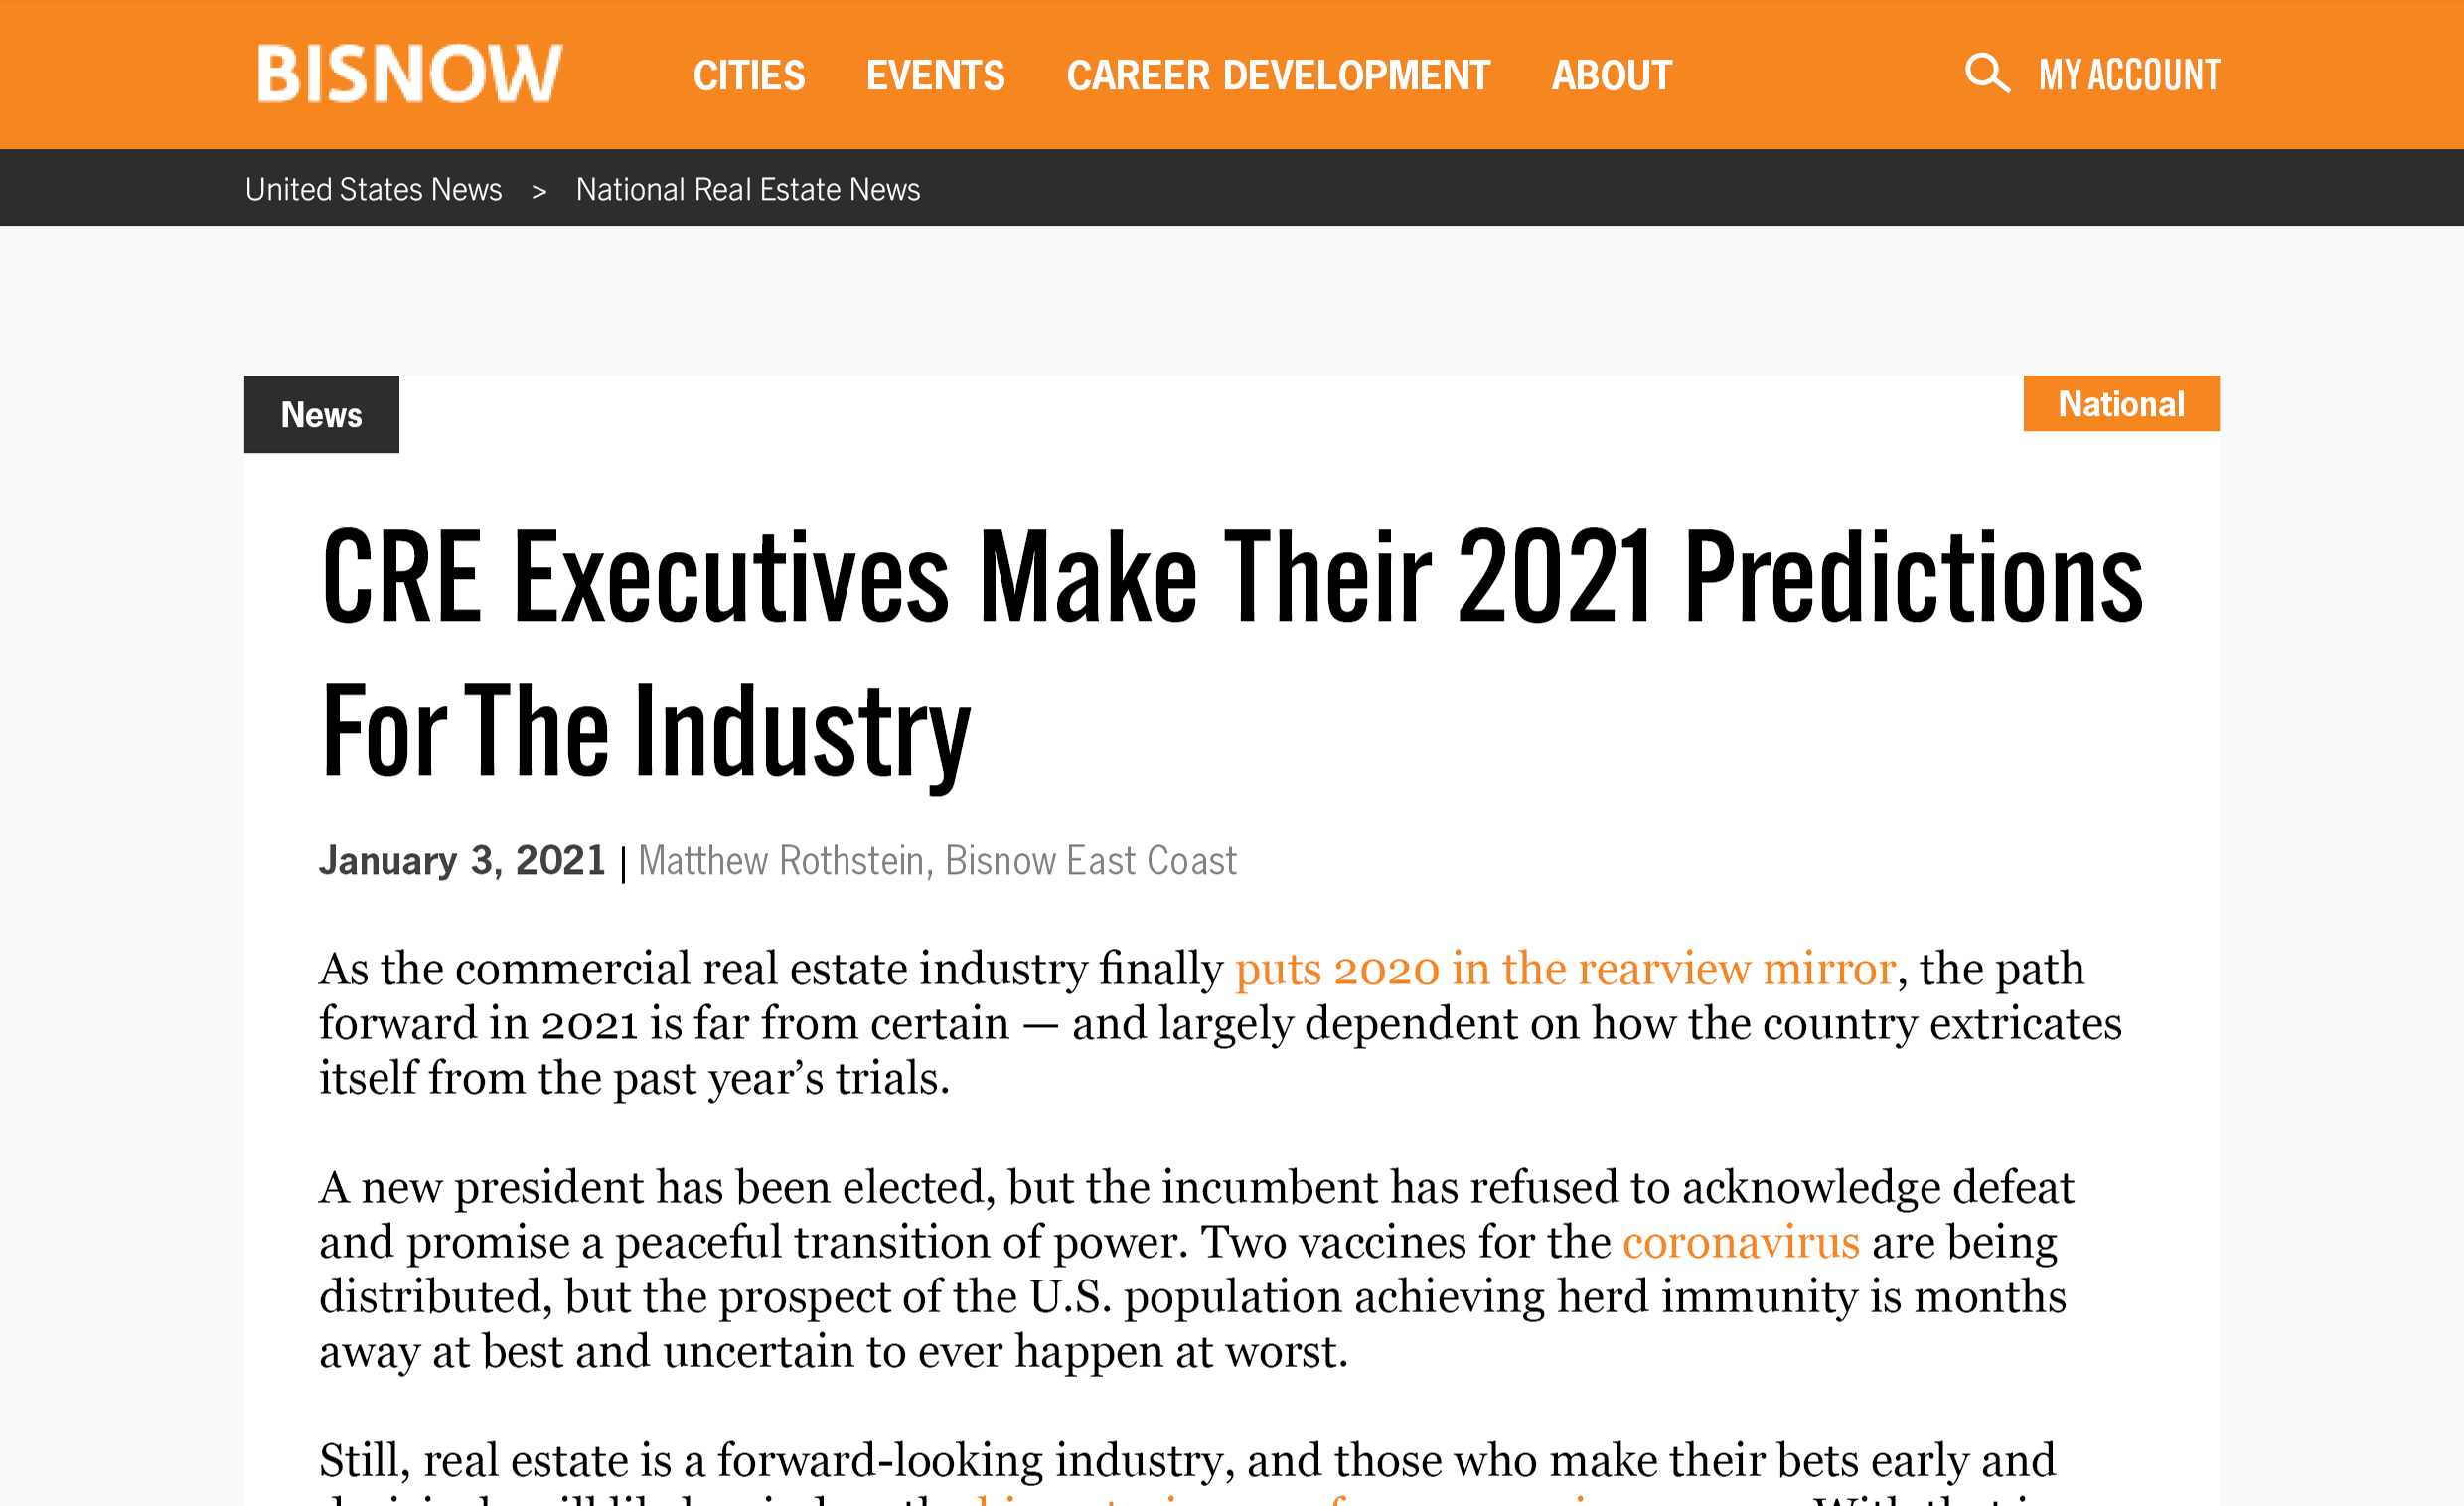 CRE Executives Make Their 2021 Predictions for the Industry | Bisnow